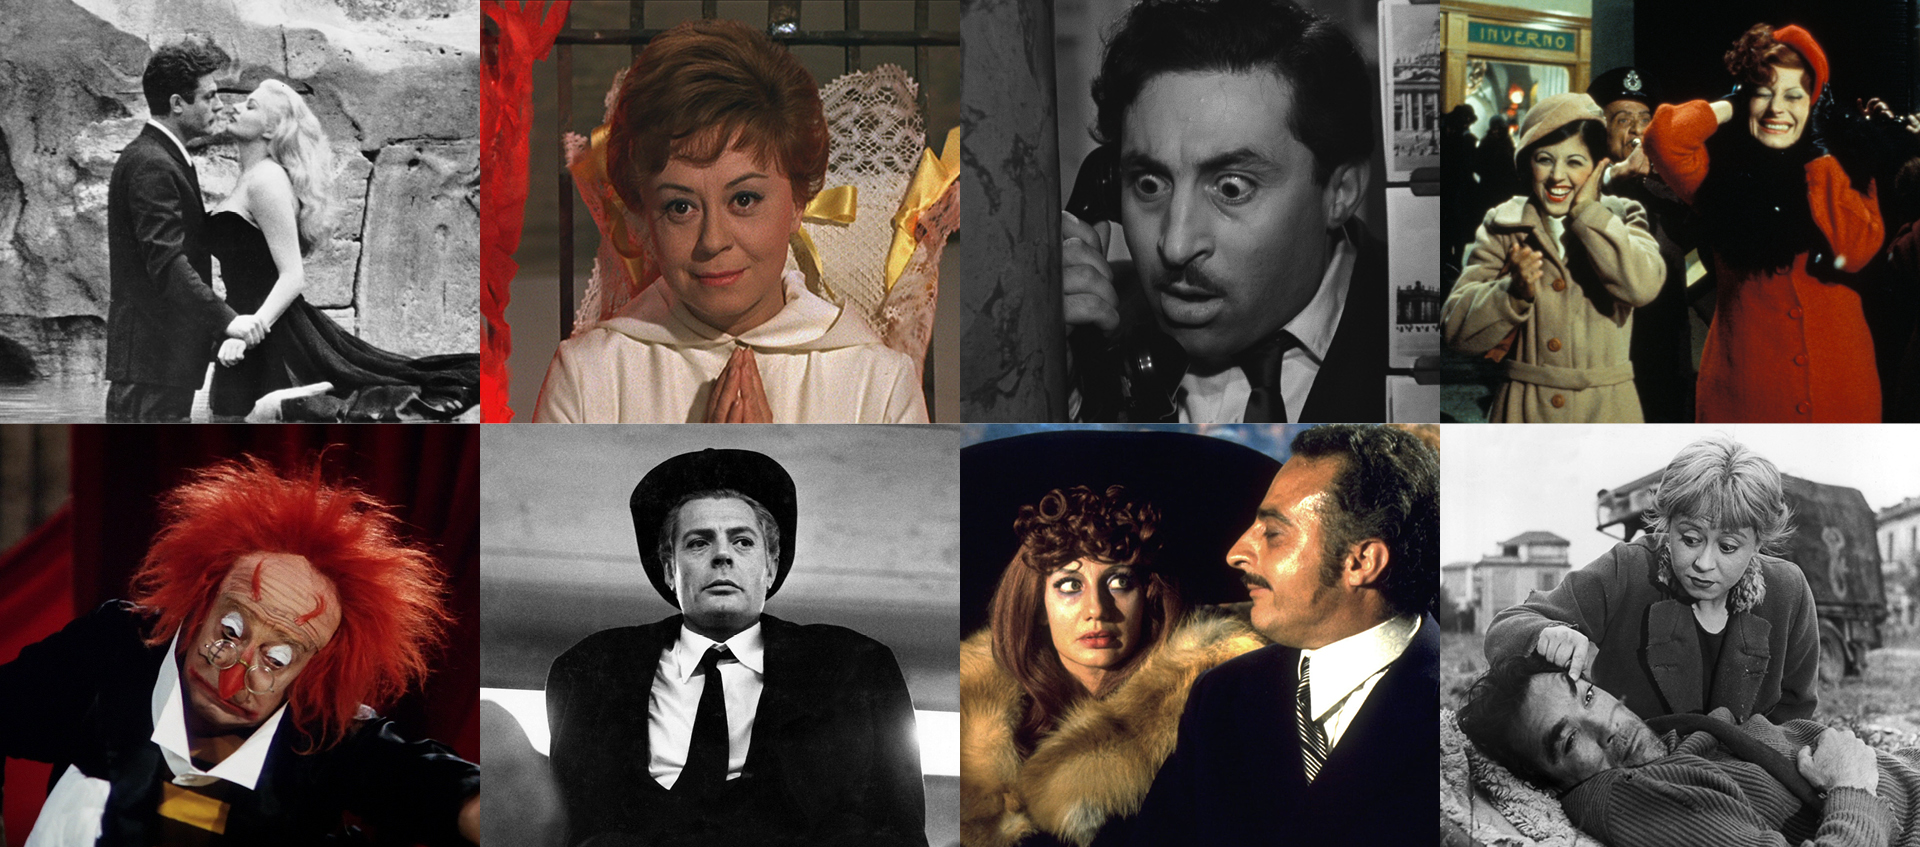 A collage of stills from several films screening in our series Retrospective: Federico Fellini.